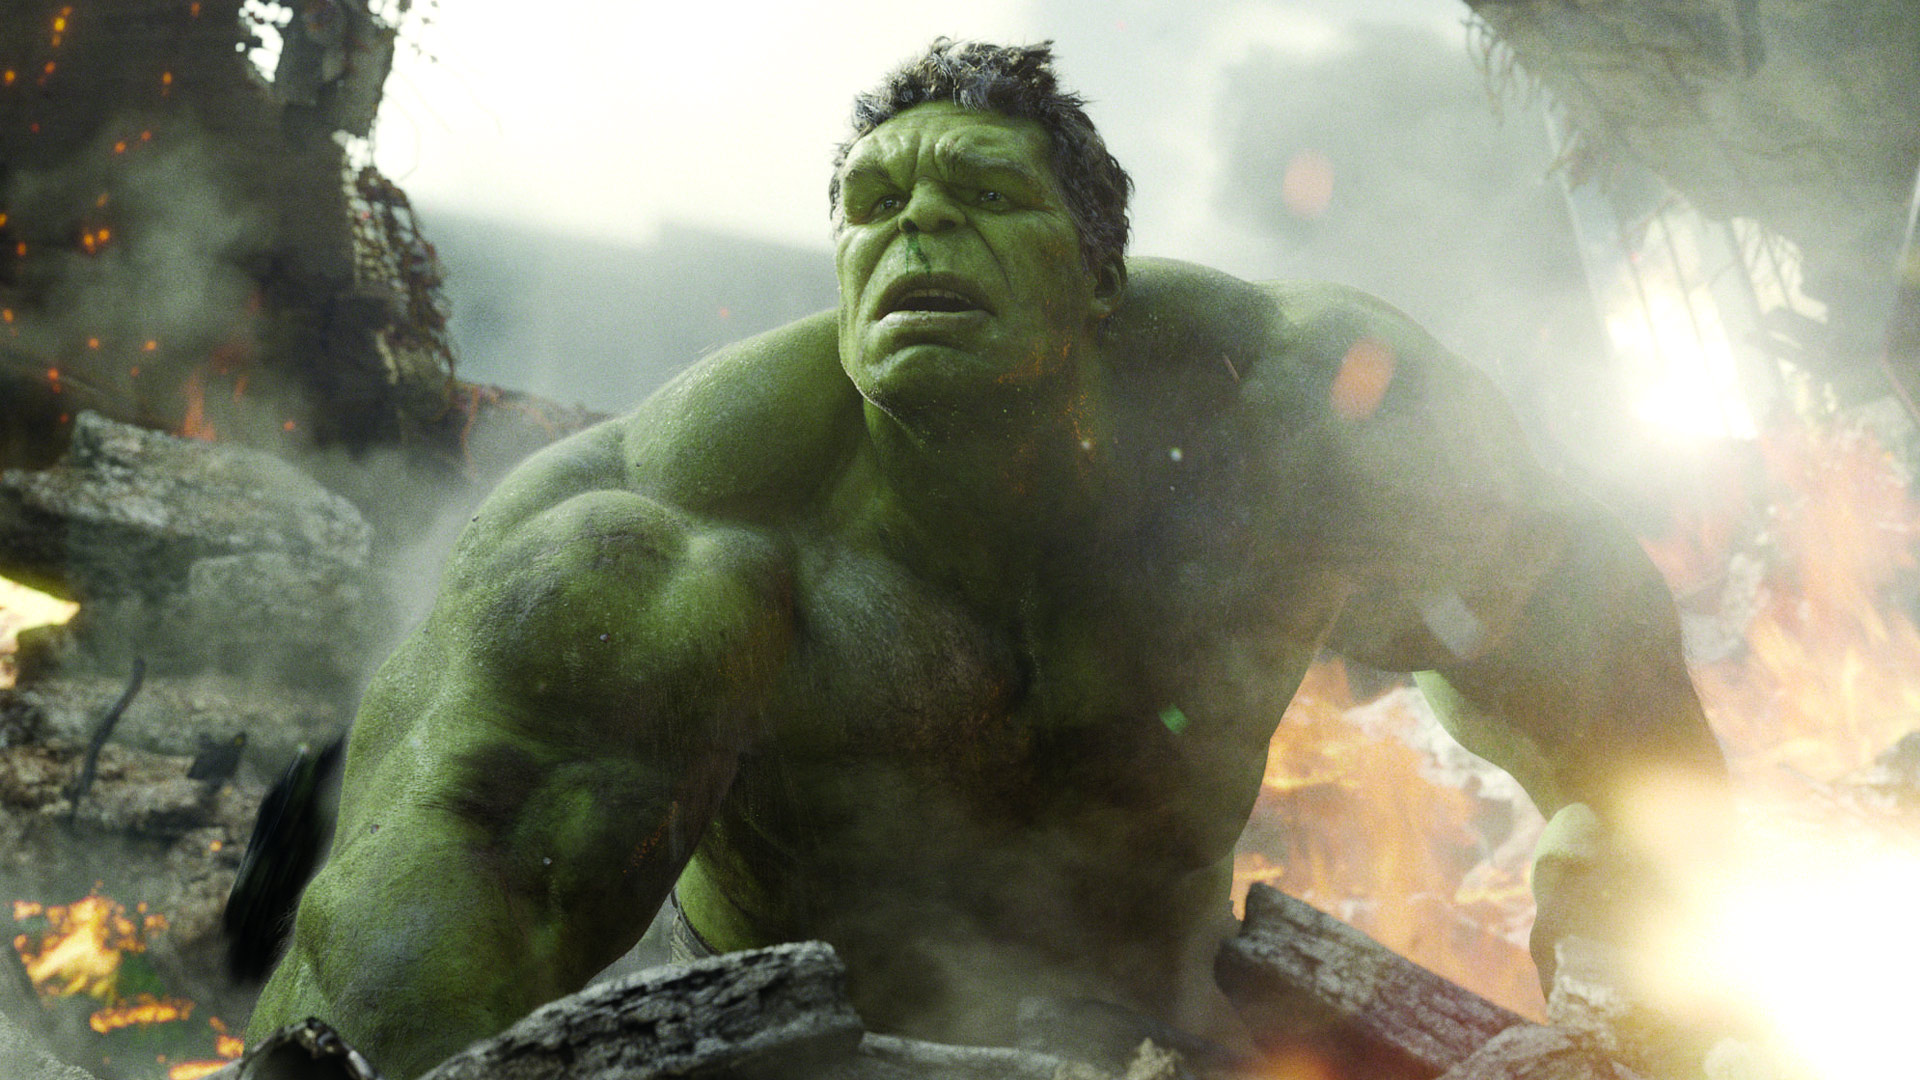 Hulk in The Avengers Age of Ultron wallpapers HD.